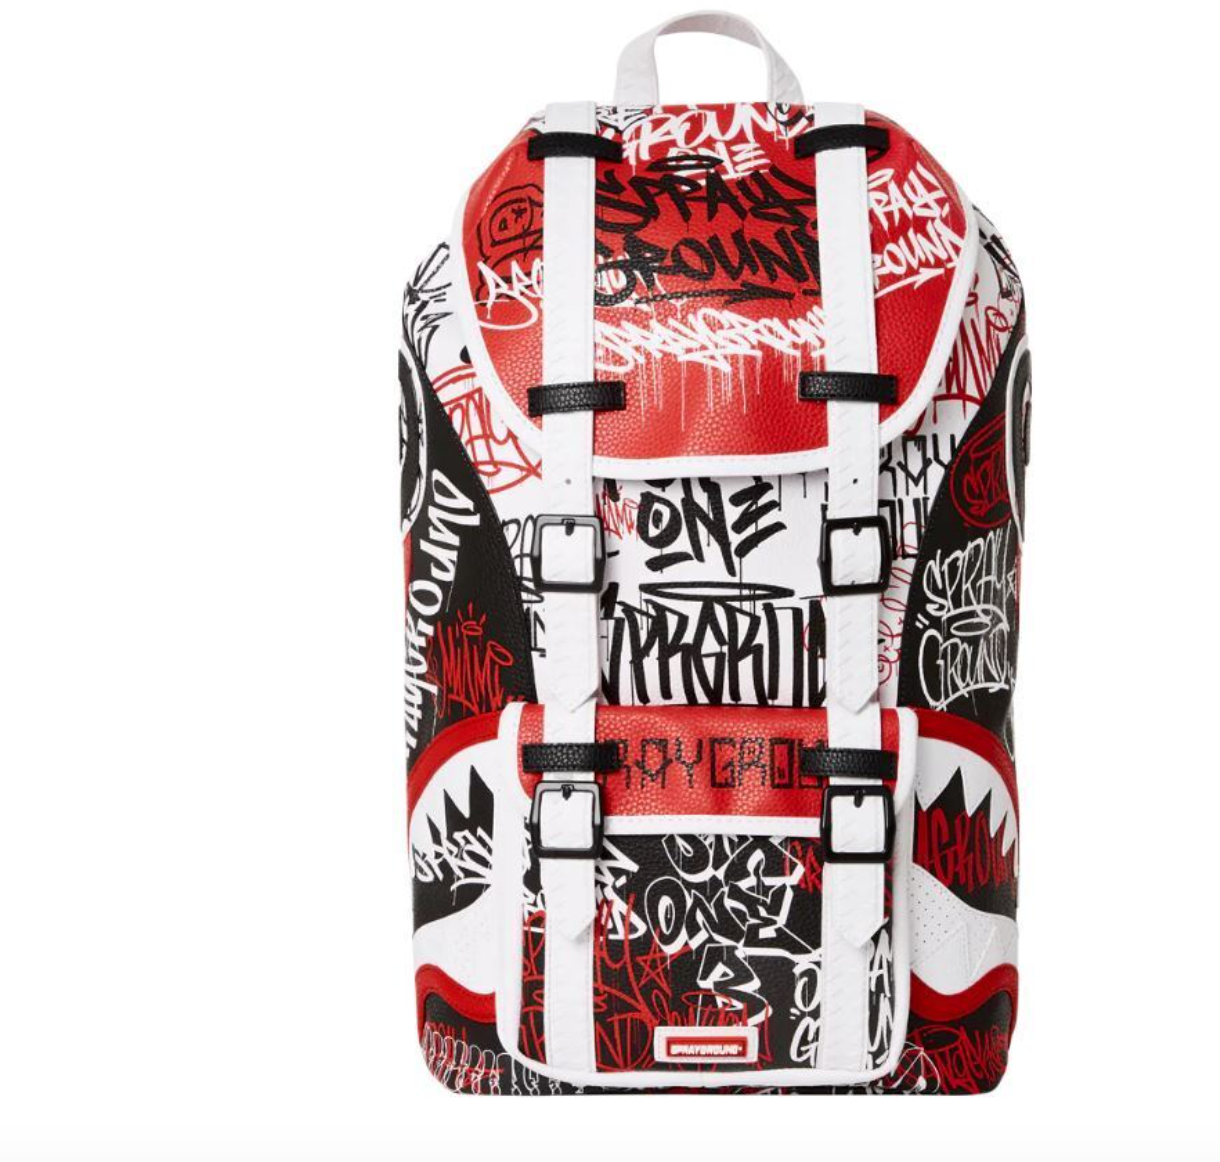 Spraygrounds - Mysterious Mastermind Hills Backpack - Clique Apparel